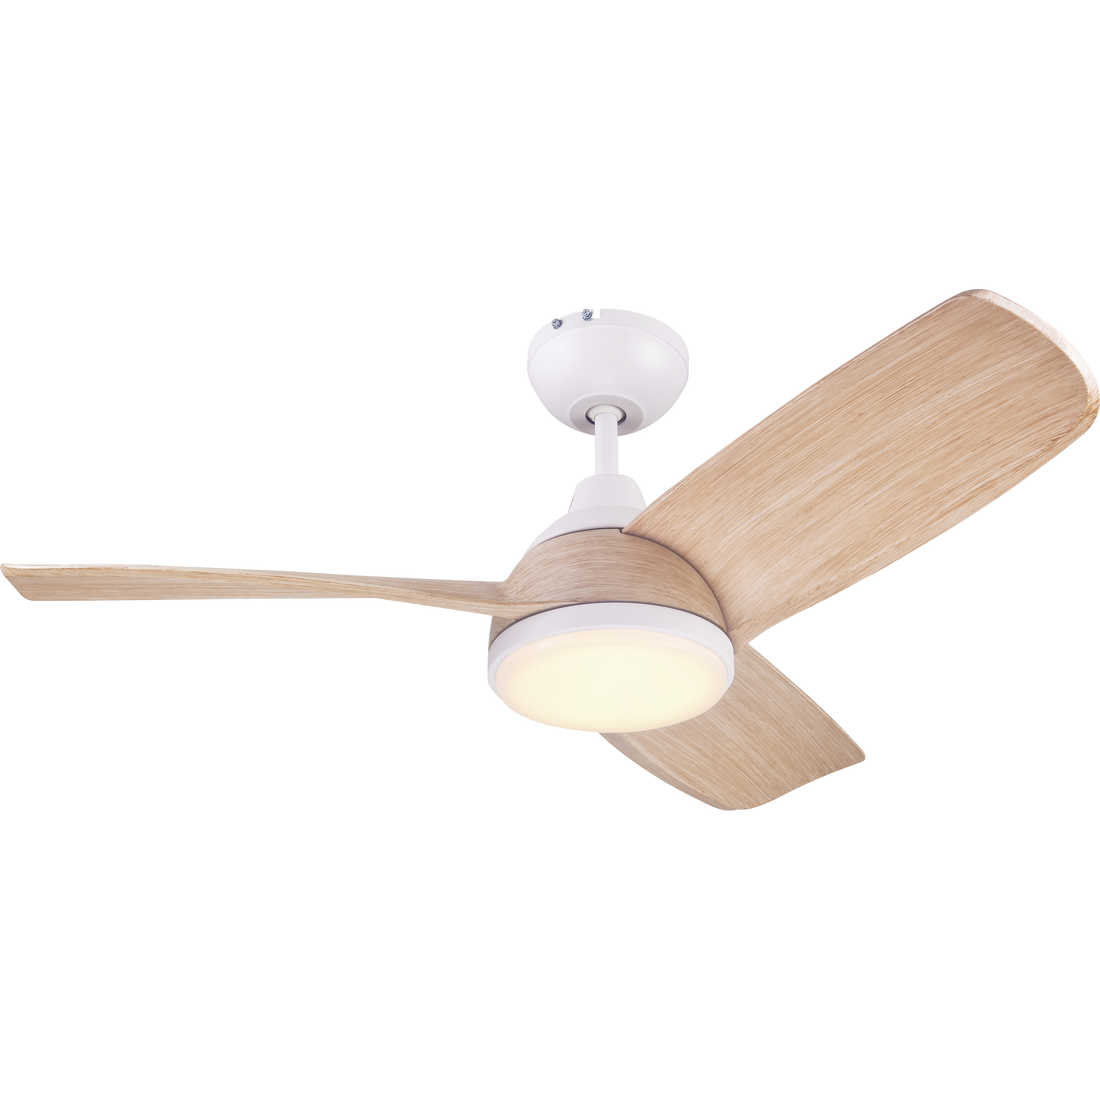 CHERCH WOOD EFFECT CEILING FAN D107 CM LED 28W 2200LM CCT DIMMABLE 3 BLADES